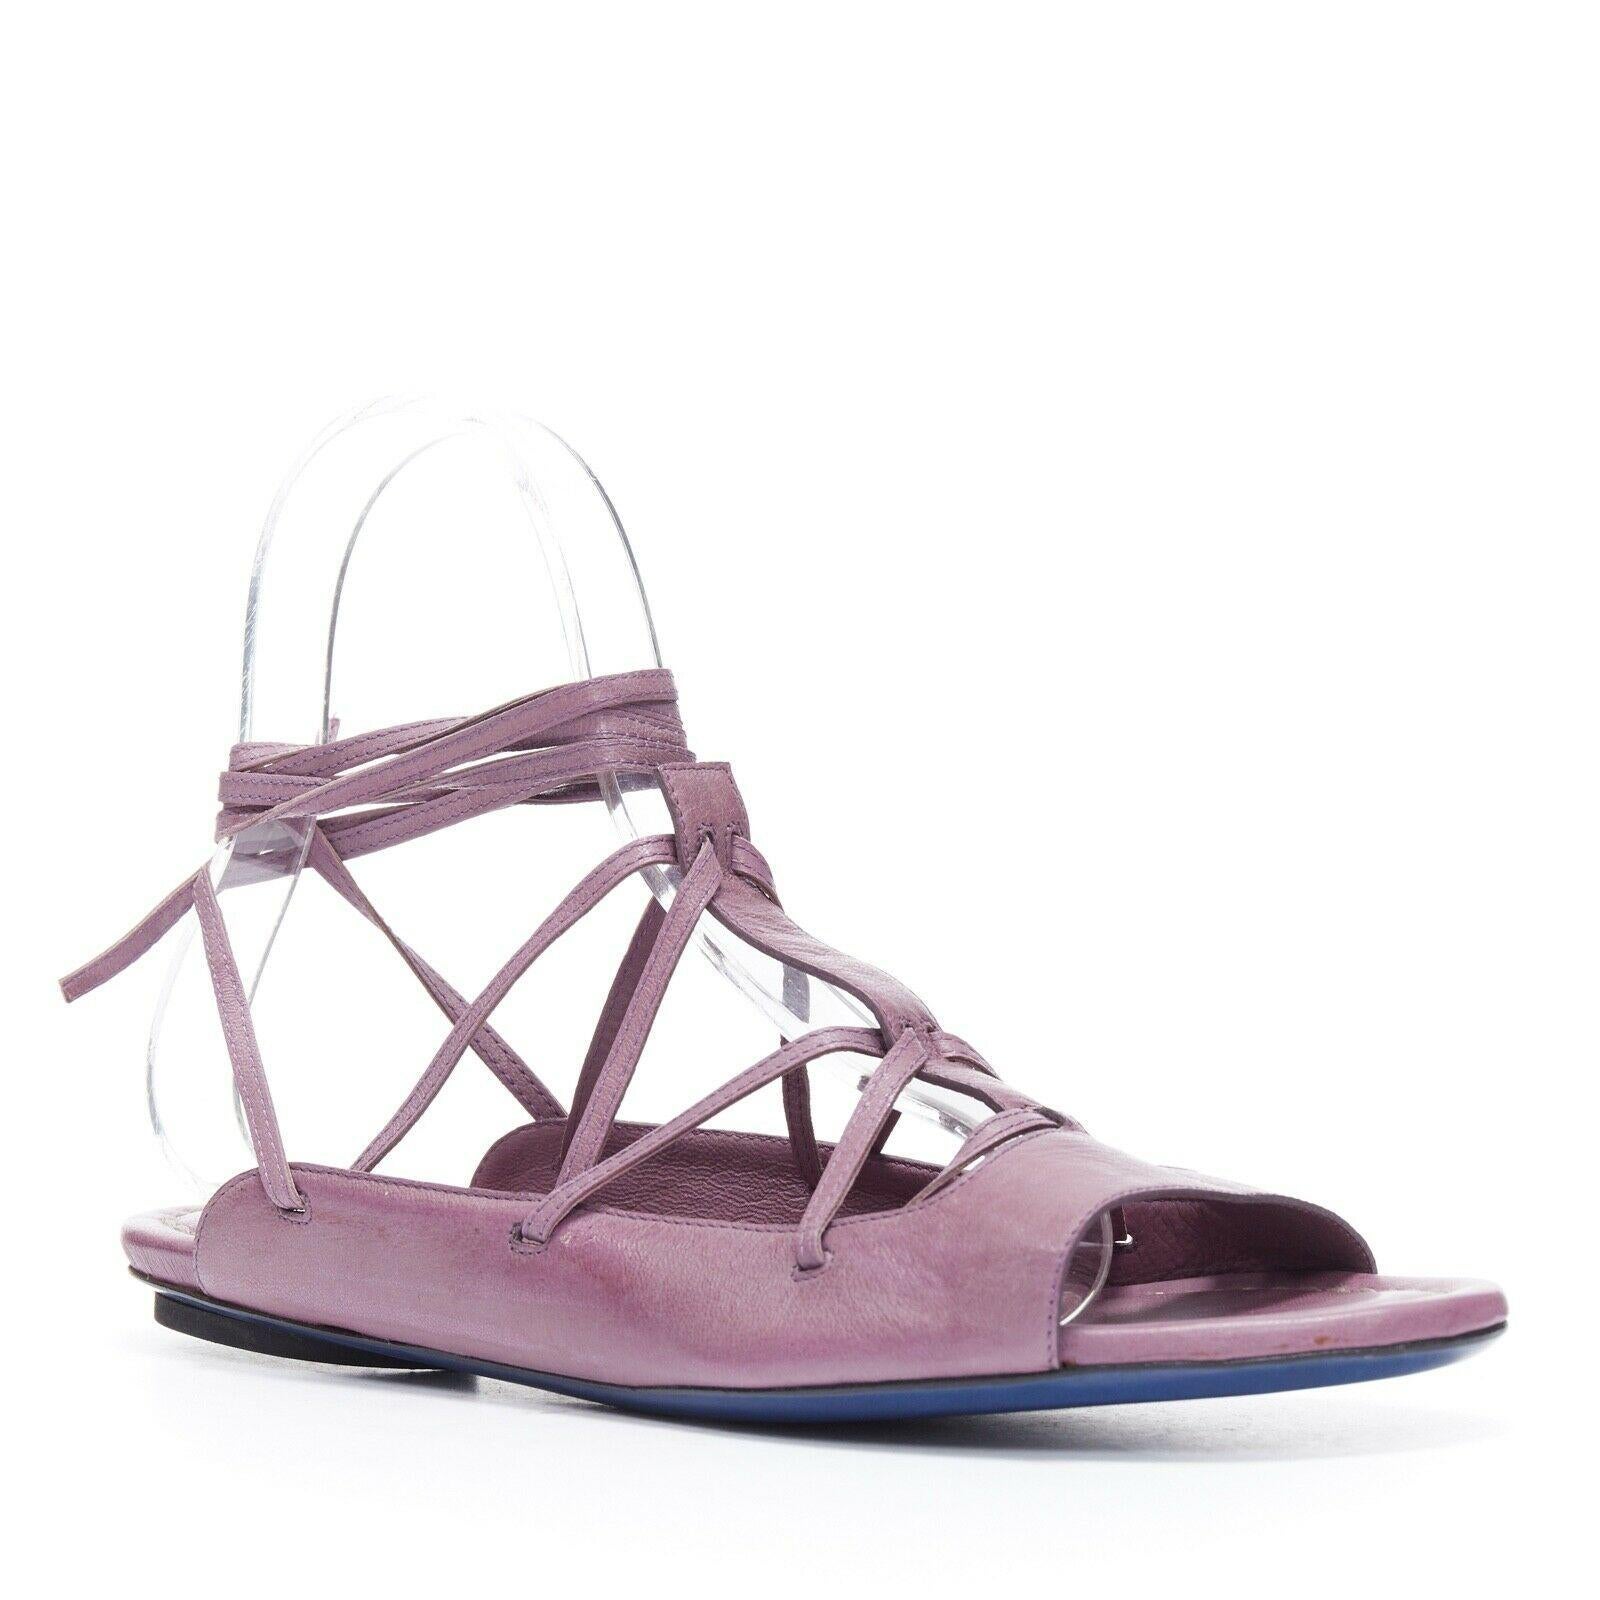 new COSTUME NATIONAL purple flat lace up wrap ankle flat sandals shoes EU39 US9
COSTUME NATIONAL
Purple leather upper. 
Lace up front. 
Wrap ankle detail. 
Open toe. 
Open heel. 
Leather sole. 
Made in Italy

CONDITION:
New with